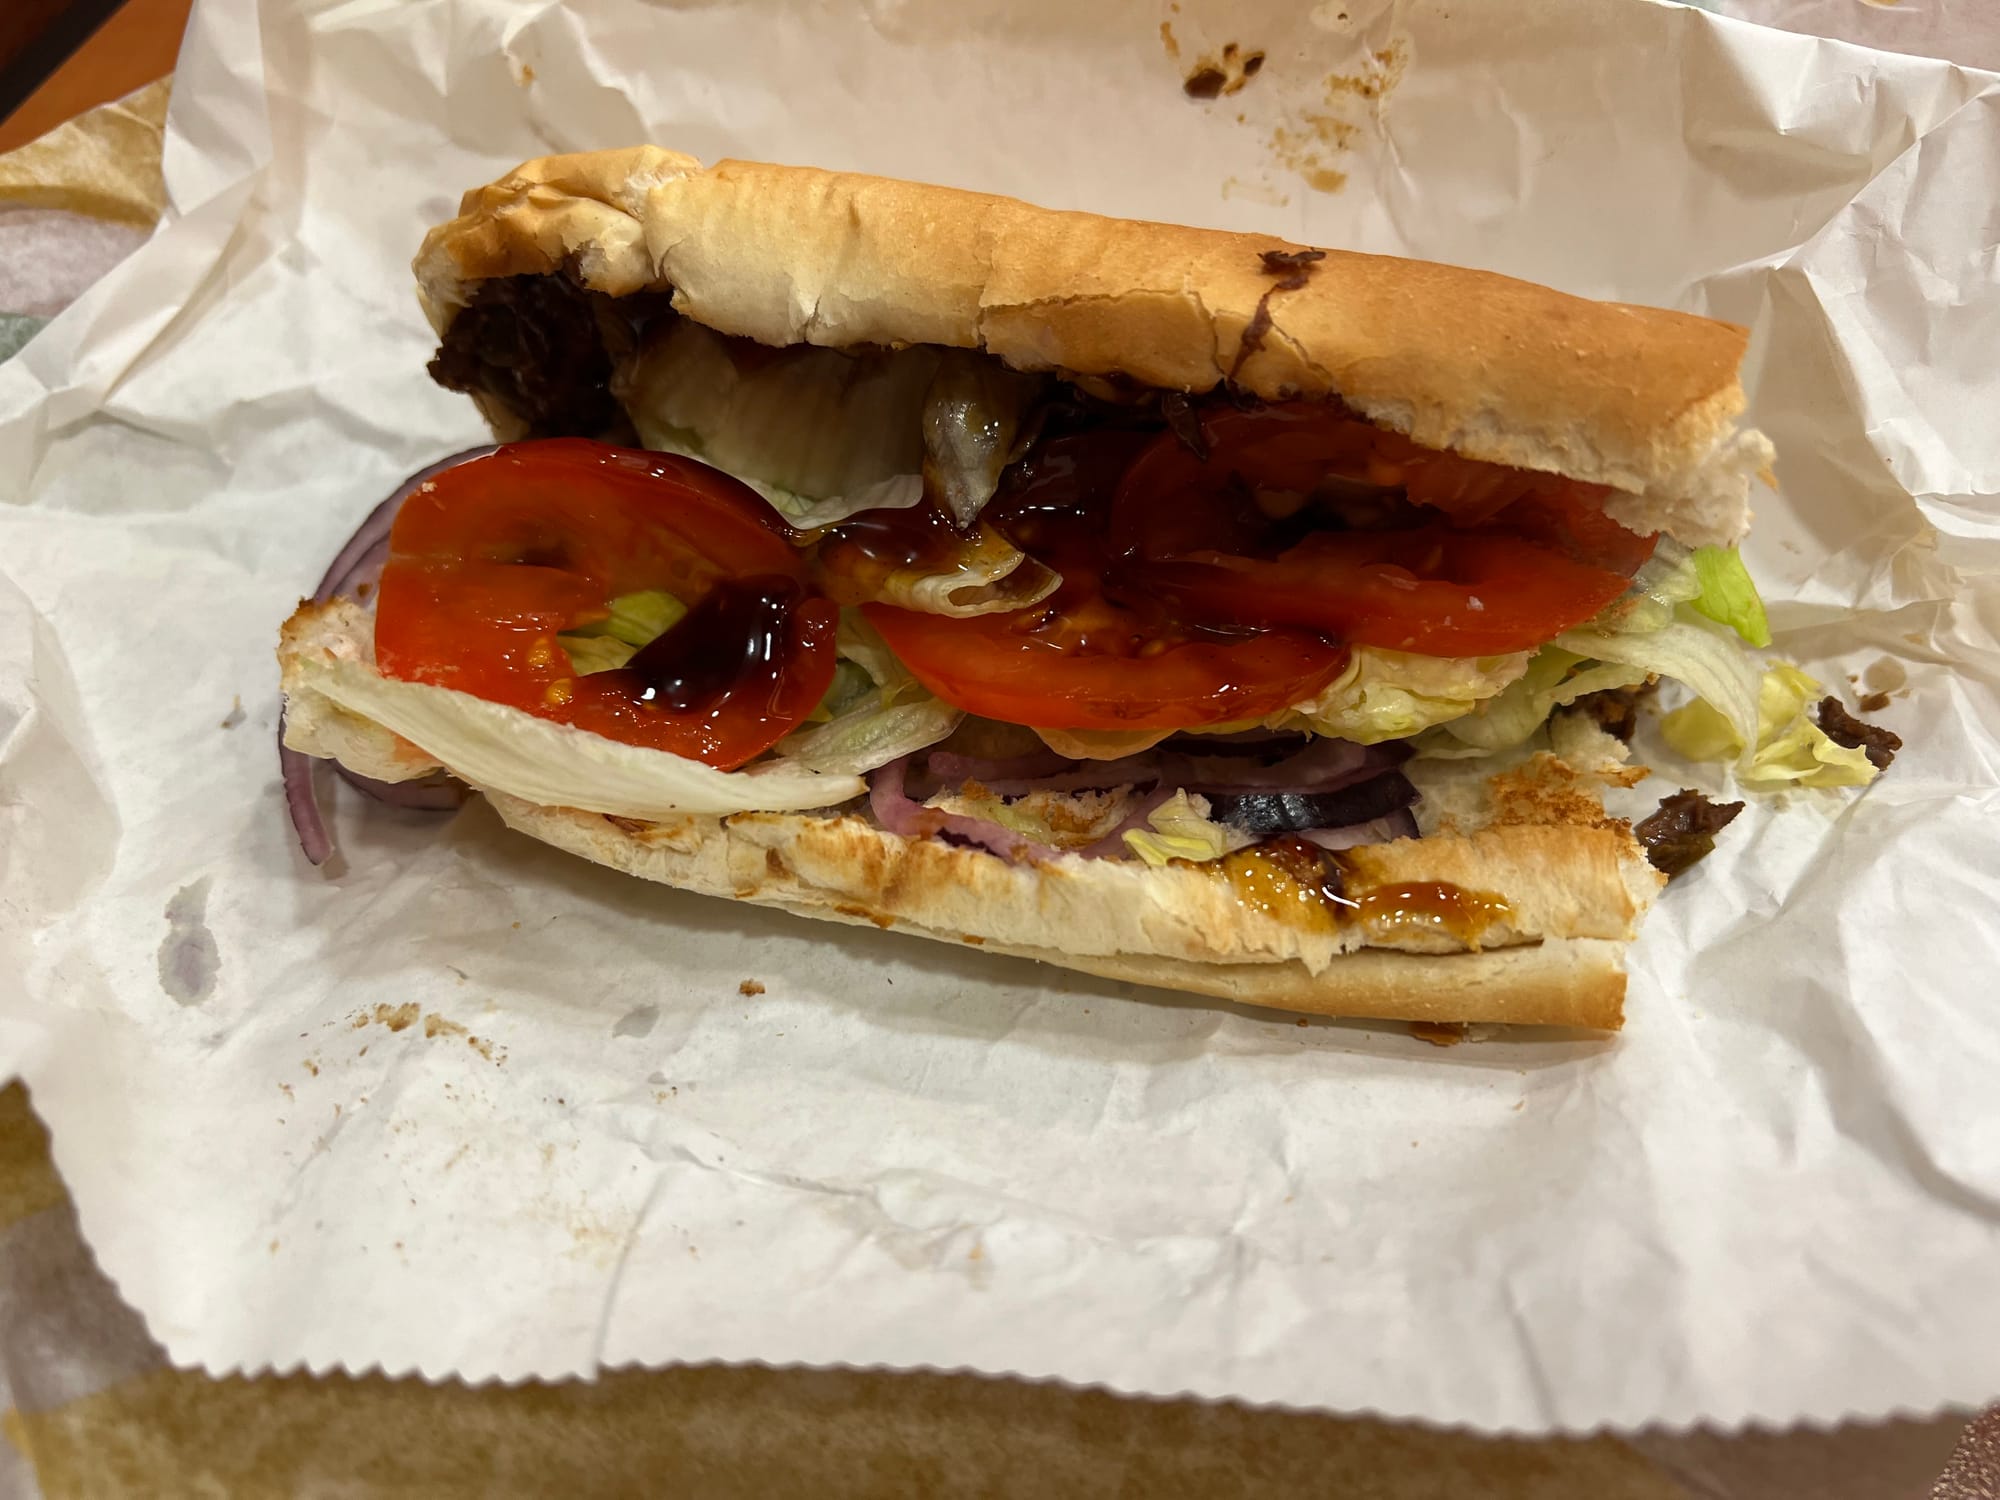 An unappetizing looking Subway sandwich. The bread is all fucked up, theres a brown sauce splattered all over it, and you can't even see the faux meat and cheese.